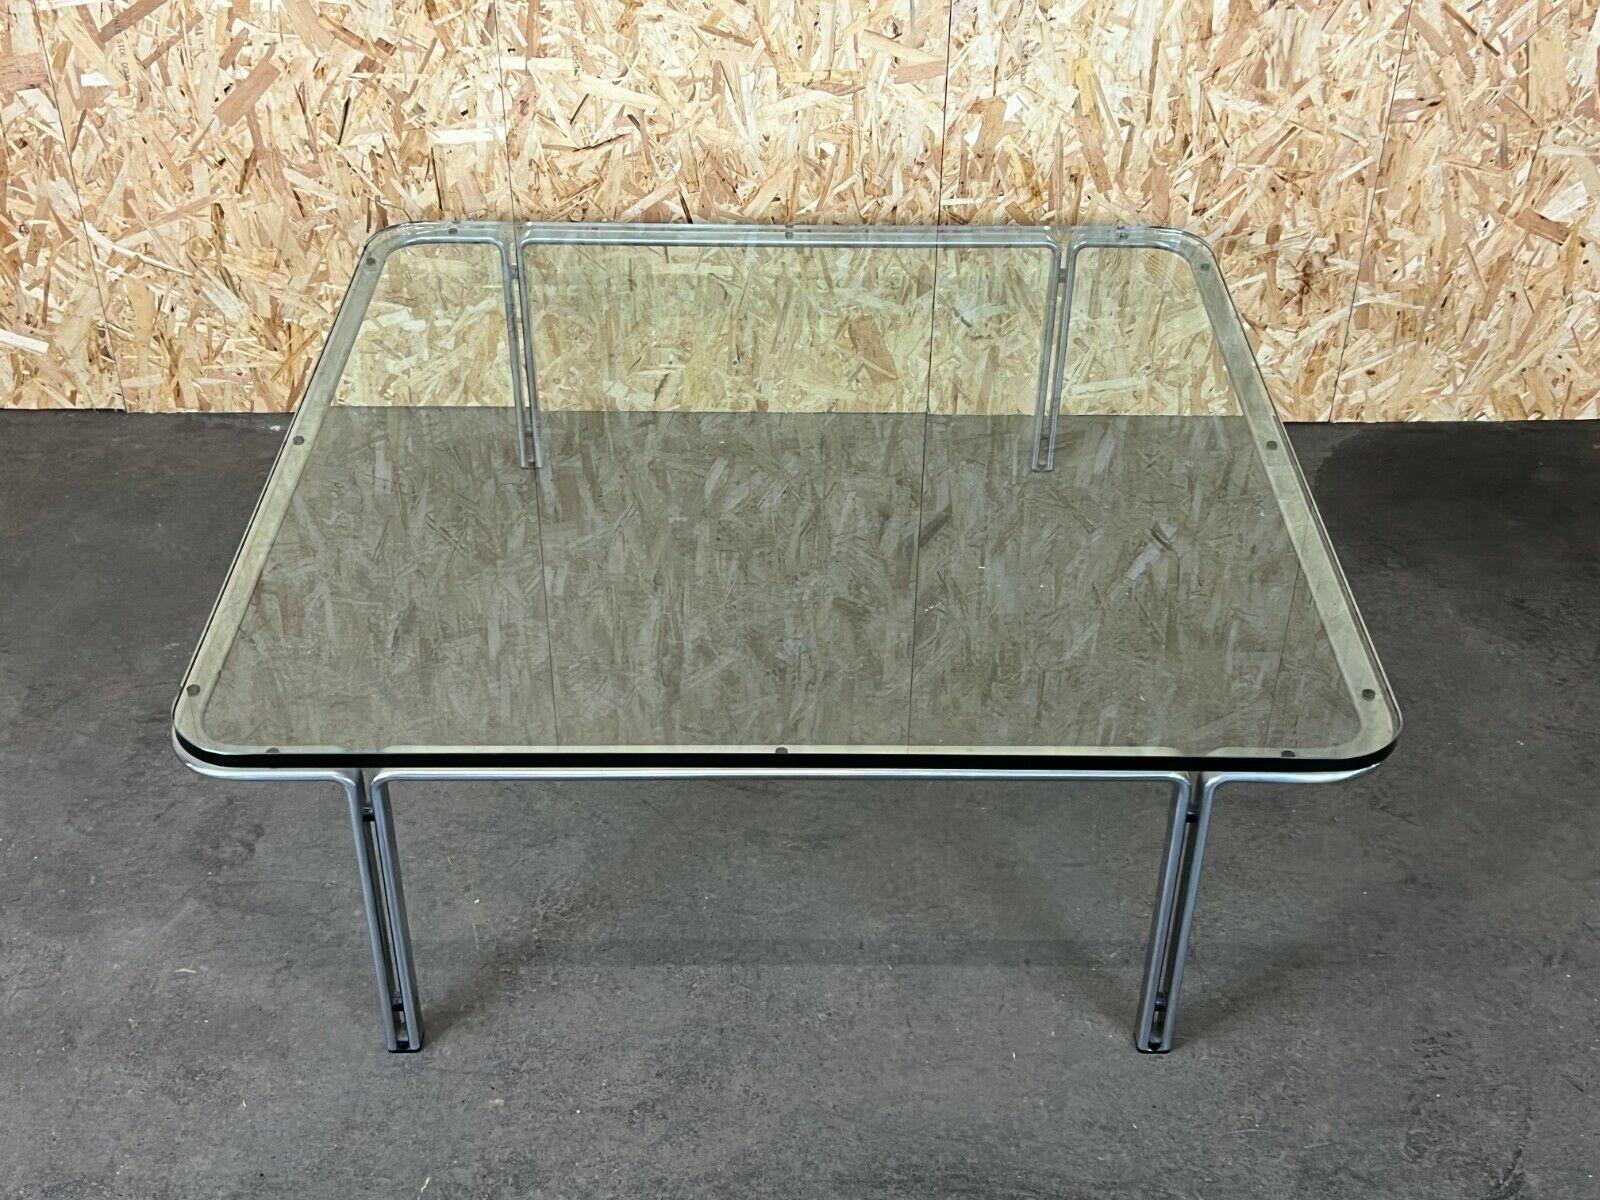 60s 70s Horst Brüning Coffee Table Kill International coffee table glass design

Object: coffee table

Manufacturer: Kill International

Condition: good - vintage

Age: around 1960-1970

Dimensions:

116cm x 116cm x 40cm

Other